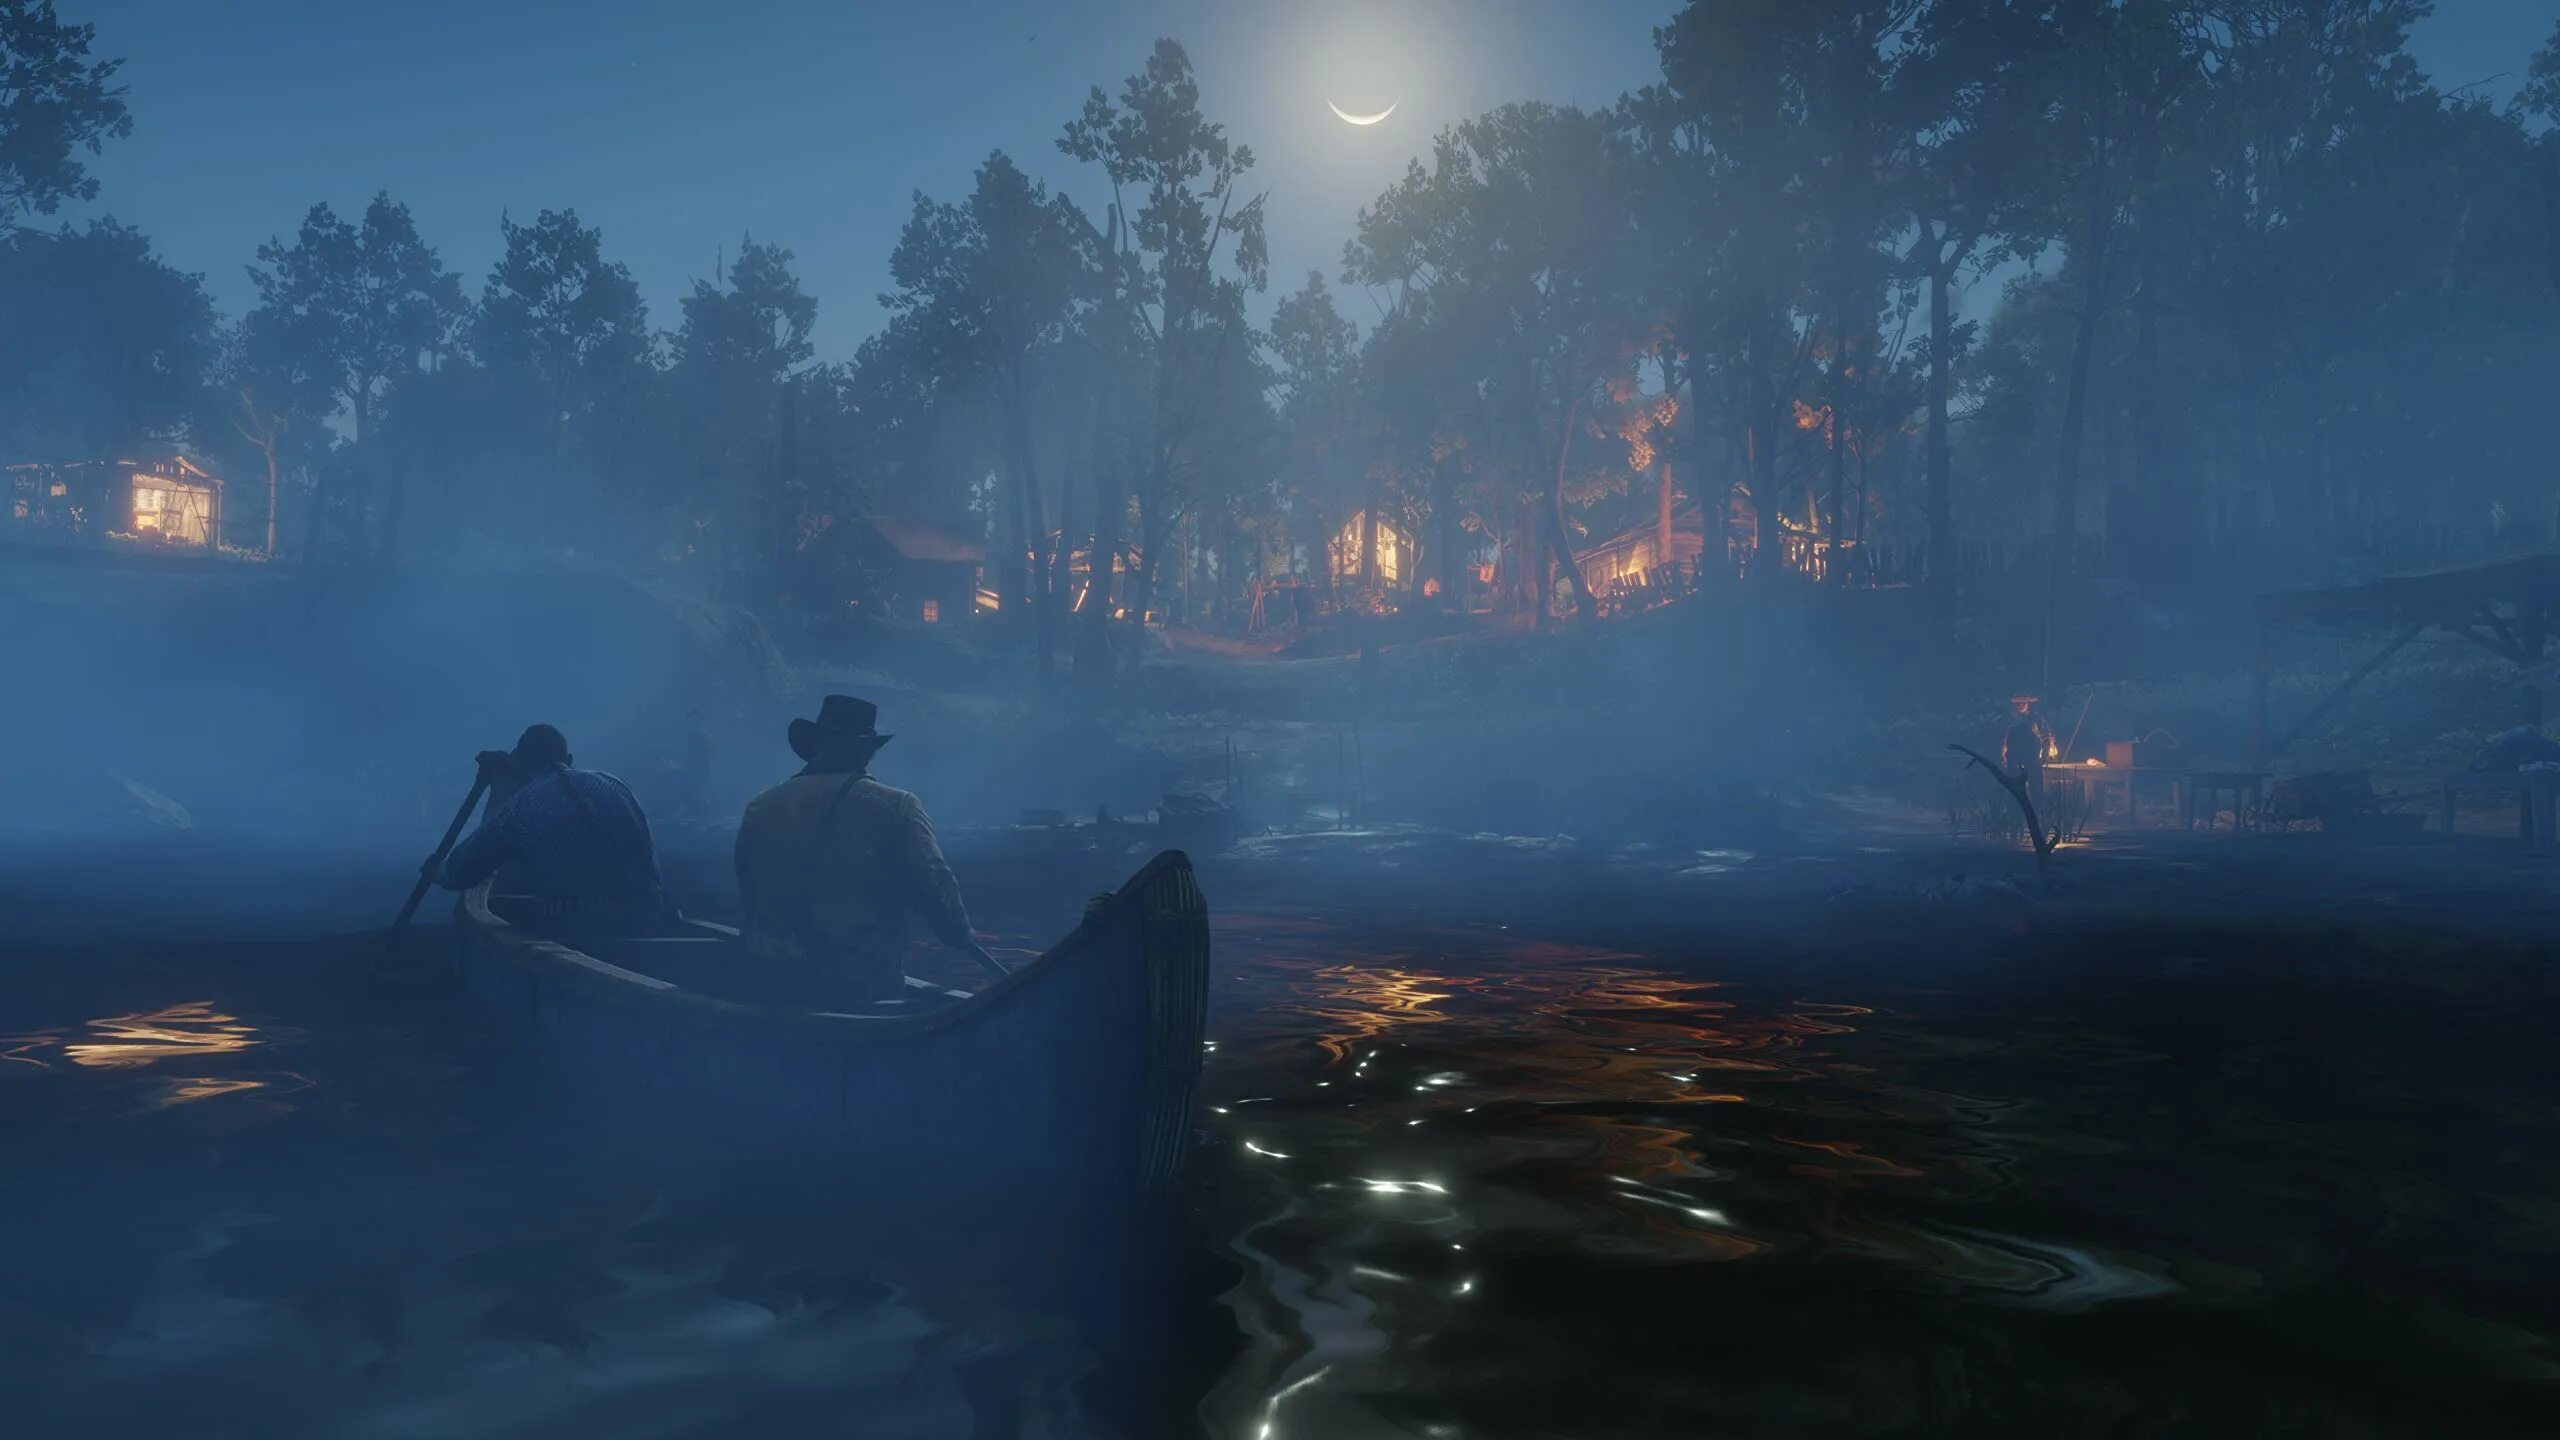 Red Dead Redemption 2. Red Dead Redemption 2 Скриншоты. Red Dead Redemption 2 на ПК. Red Dead Redemption 2 screenshots 4k. Dead redemption 2 на pc